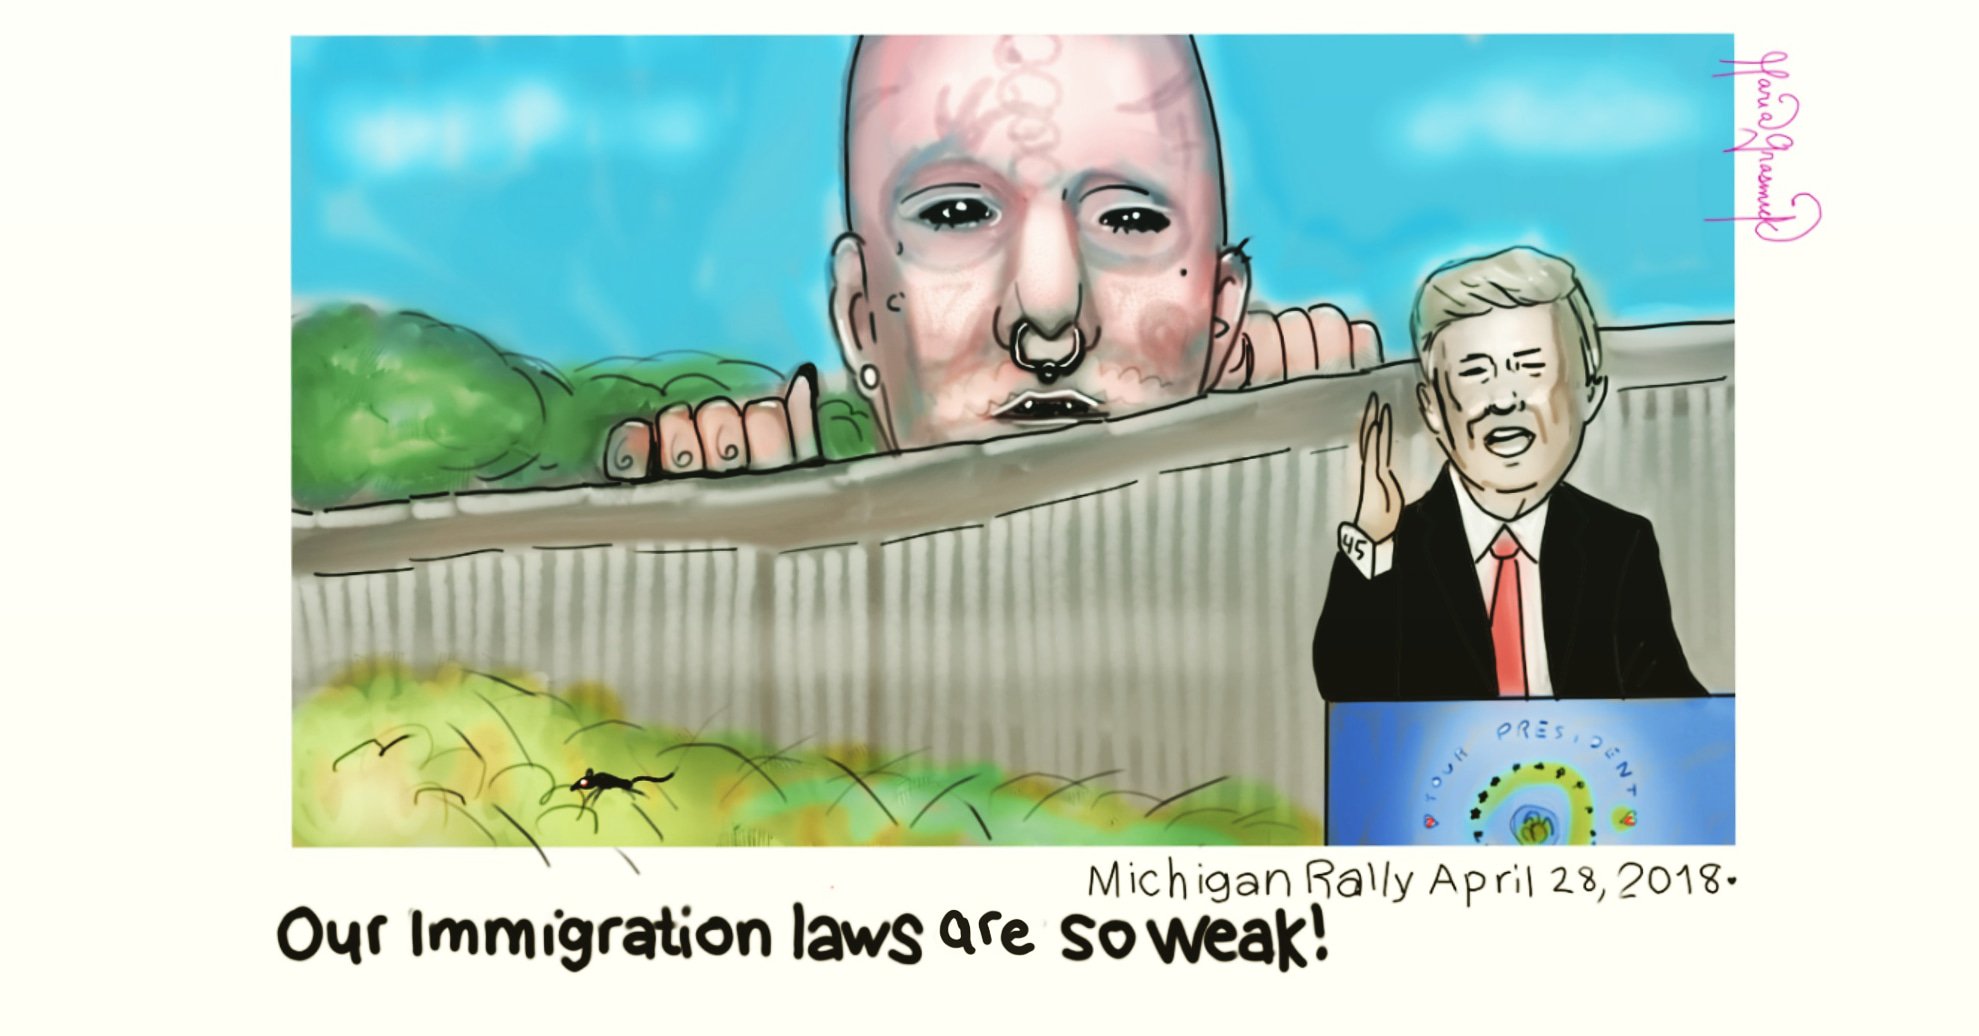 Our Immigration laws are so weak!